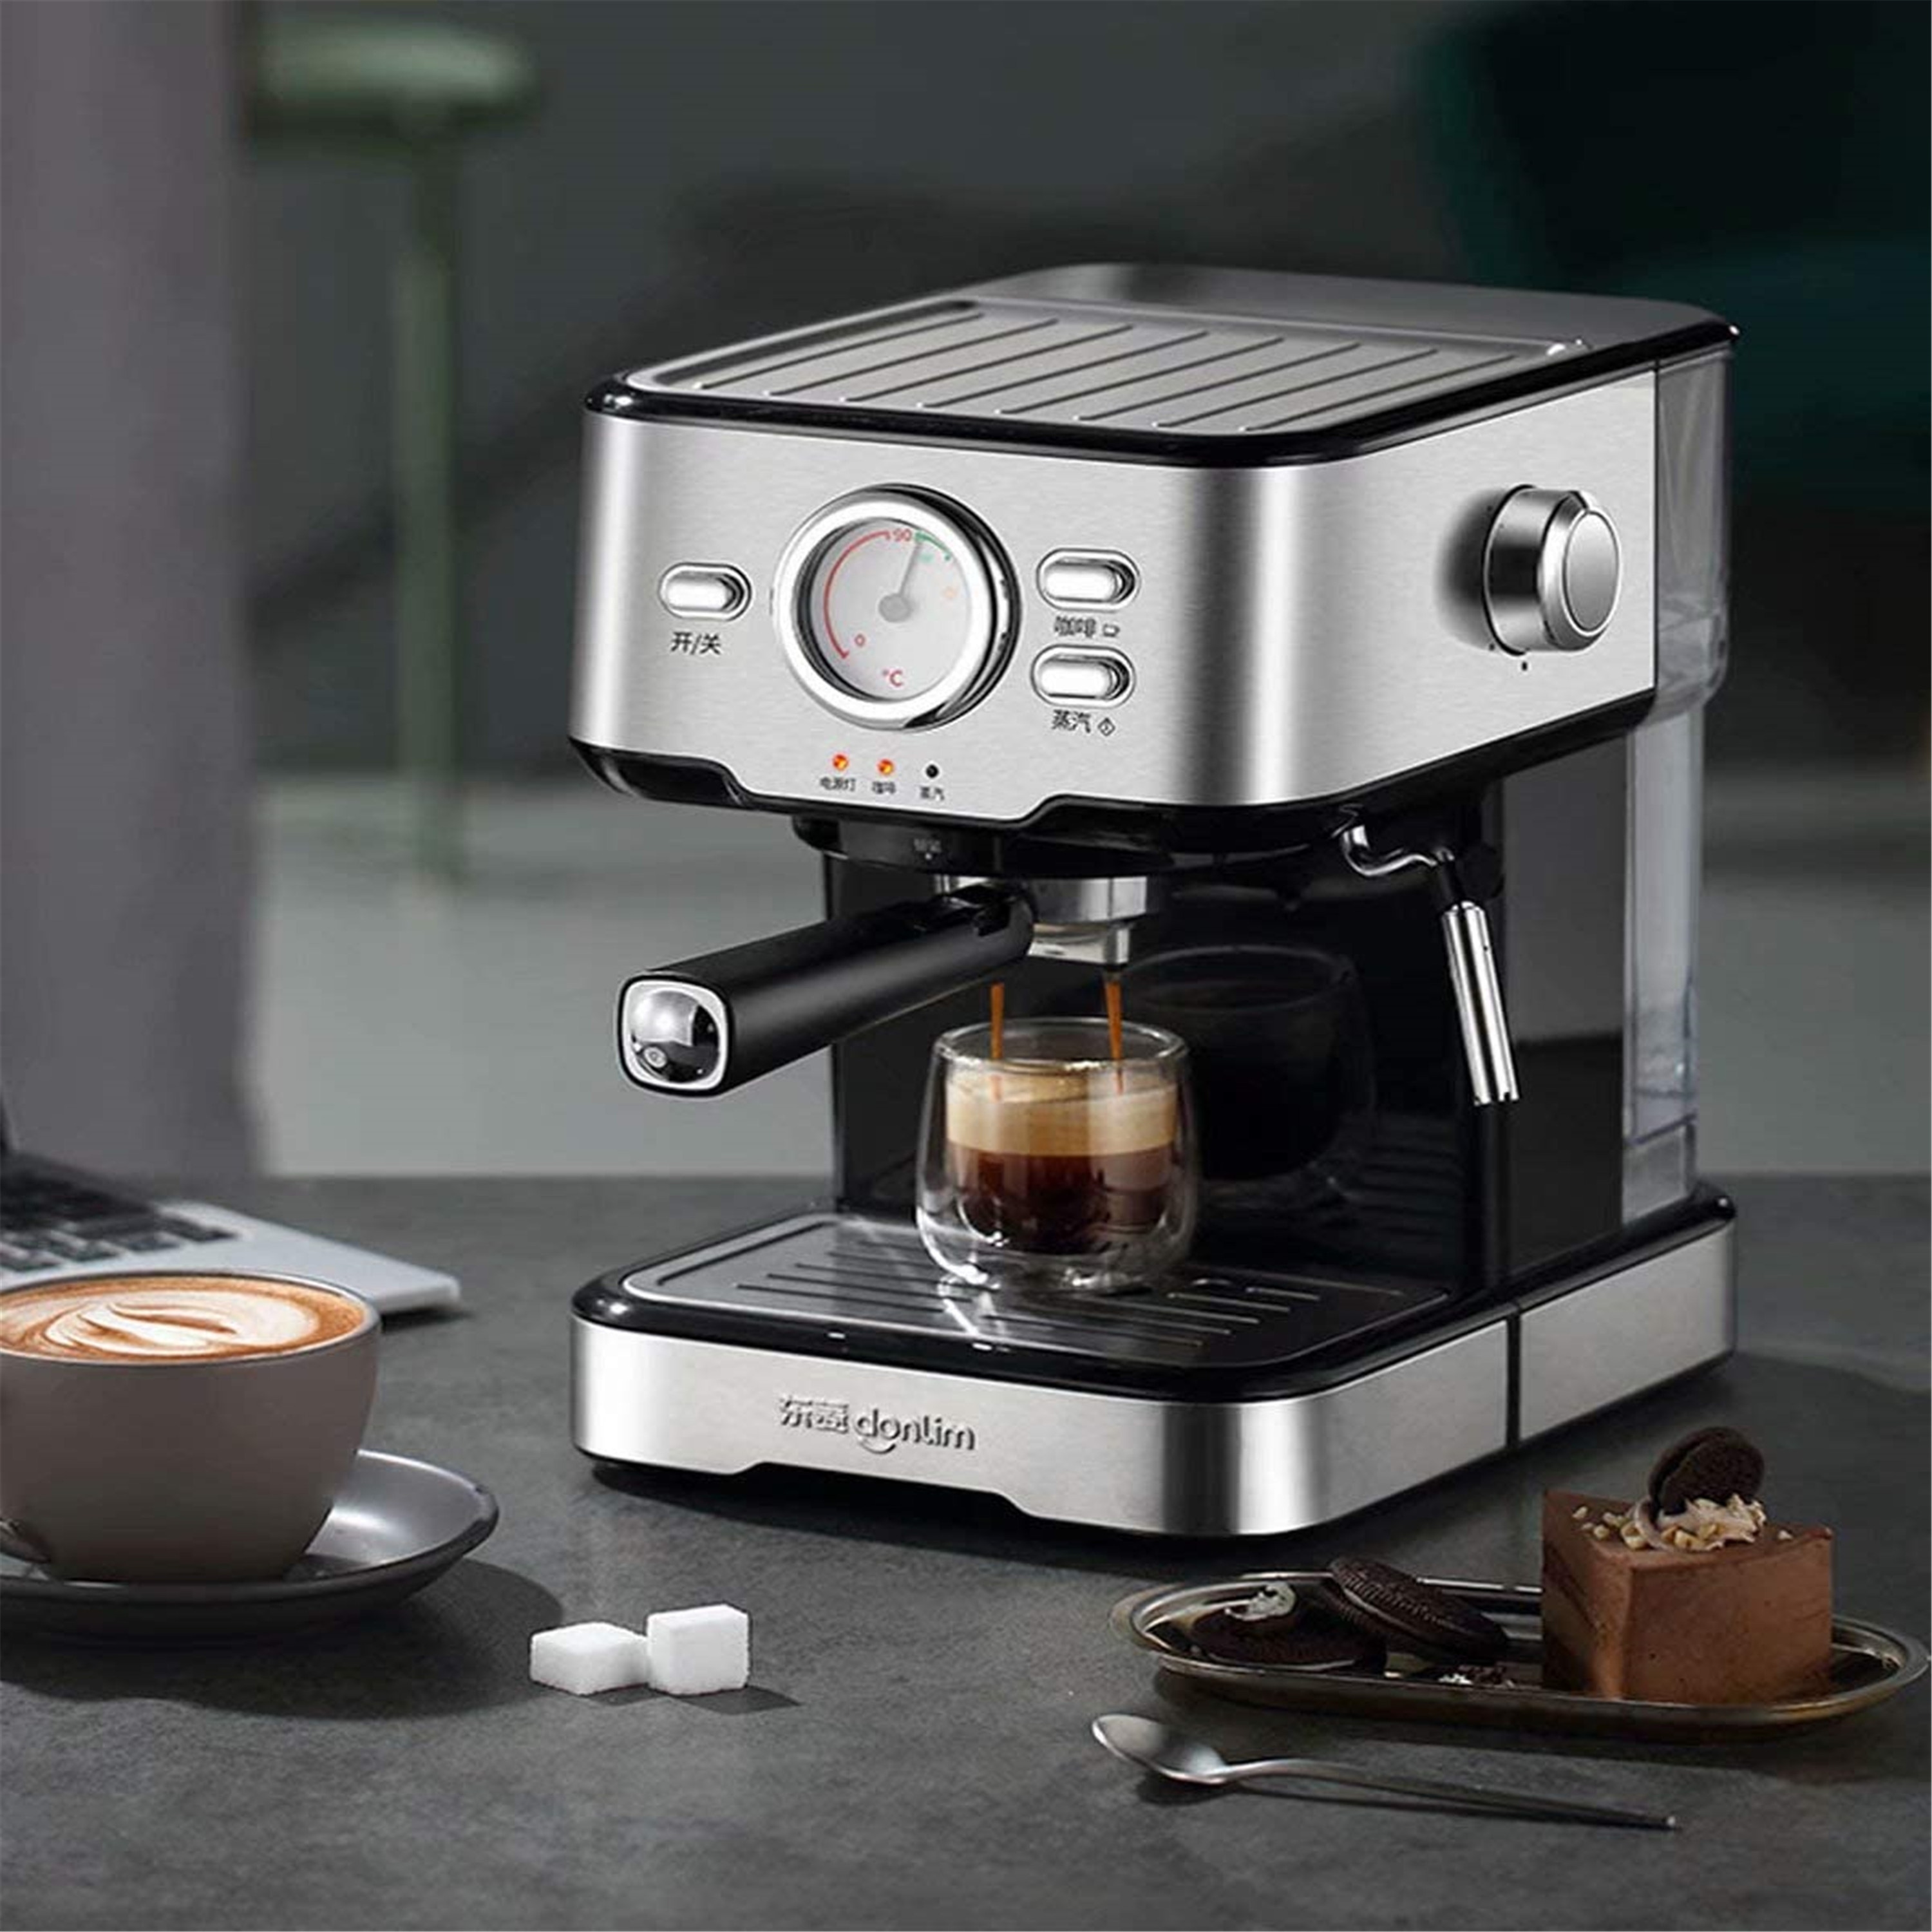 https://ak1.ostkcdn.com/images/products/is/images/direct/8385652697a7fe4be6ac52c4241b2838c05c1b1d/20Bar-Coffee-Machine-Maker-Espresso-Cups-Semi-Automatic-Household-Steam-Milk-Frother.jpg